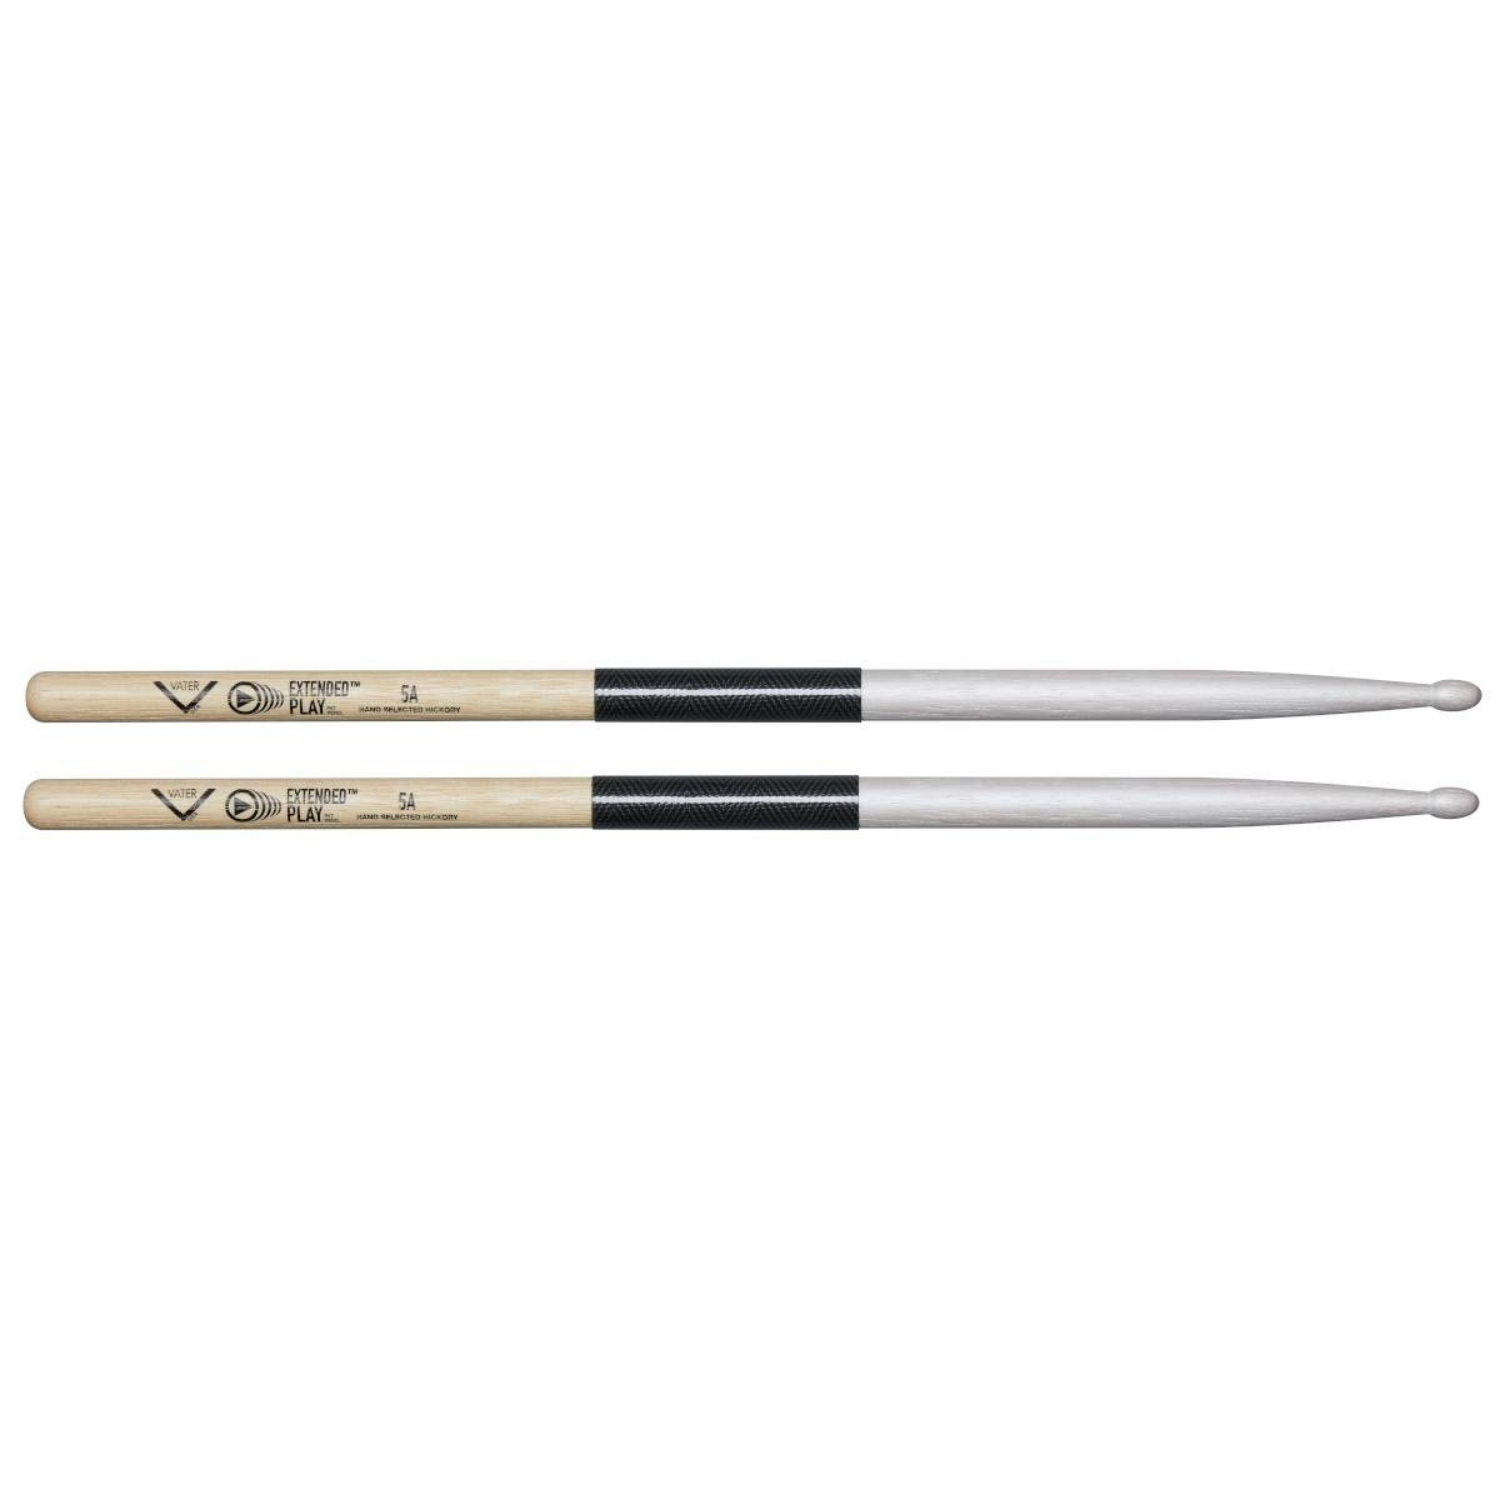 Vater VEP5AW Extended Play Series Los Angeles 5A Wood